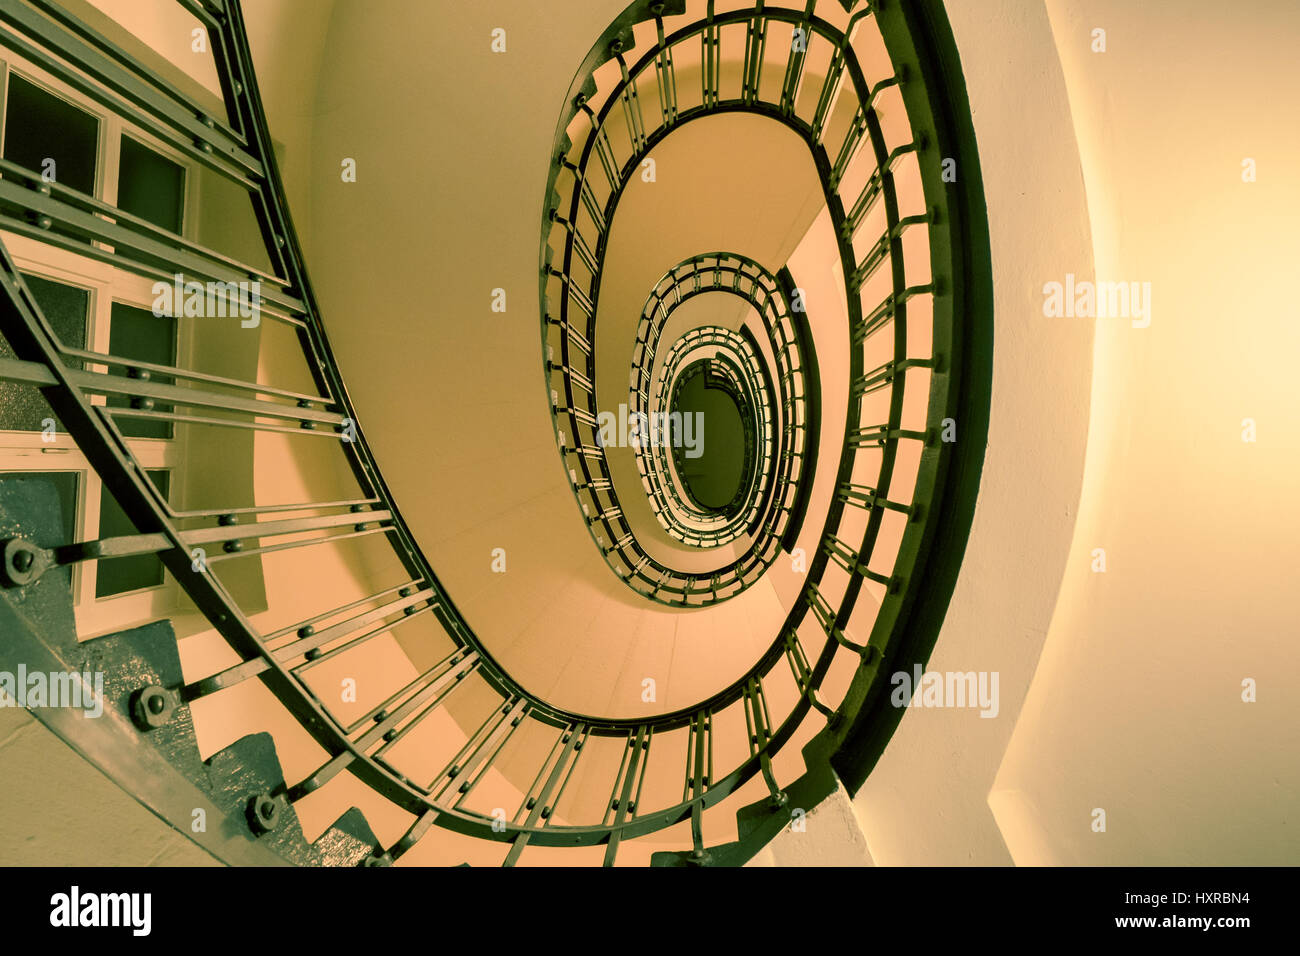 Vintage spiral Staircase in a multiple family dwelling Stock Photo